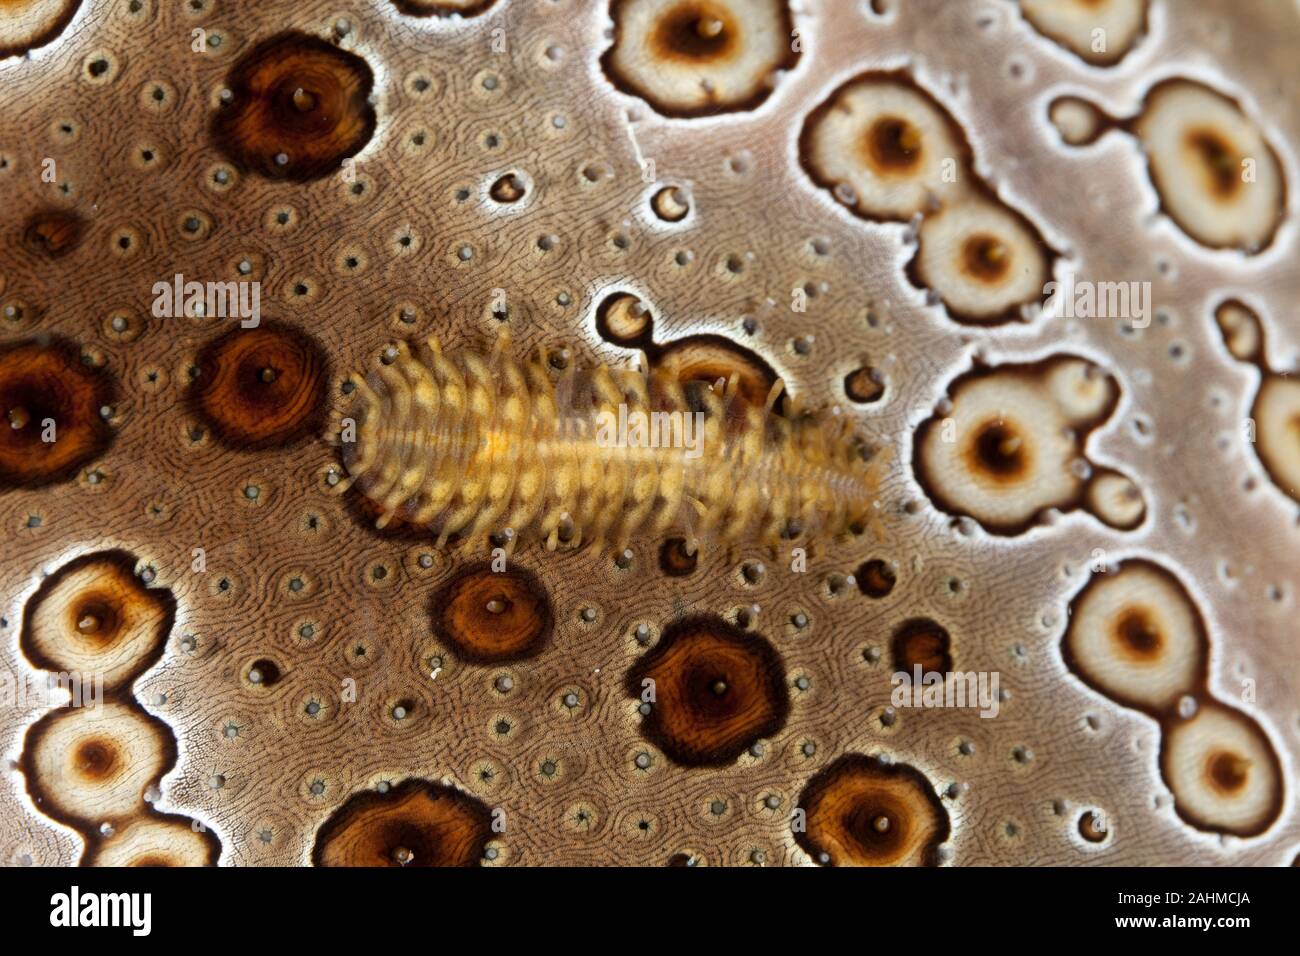 Sea Cucumber Scale Worm, Gastrolepidia clavigera, crawling on its host Stock Photo